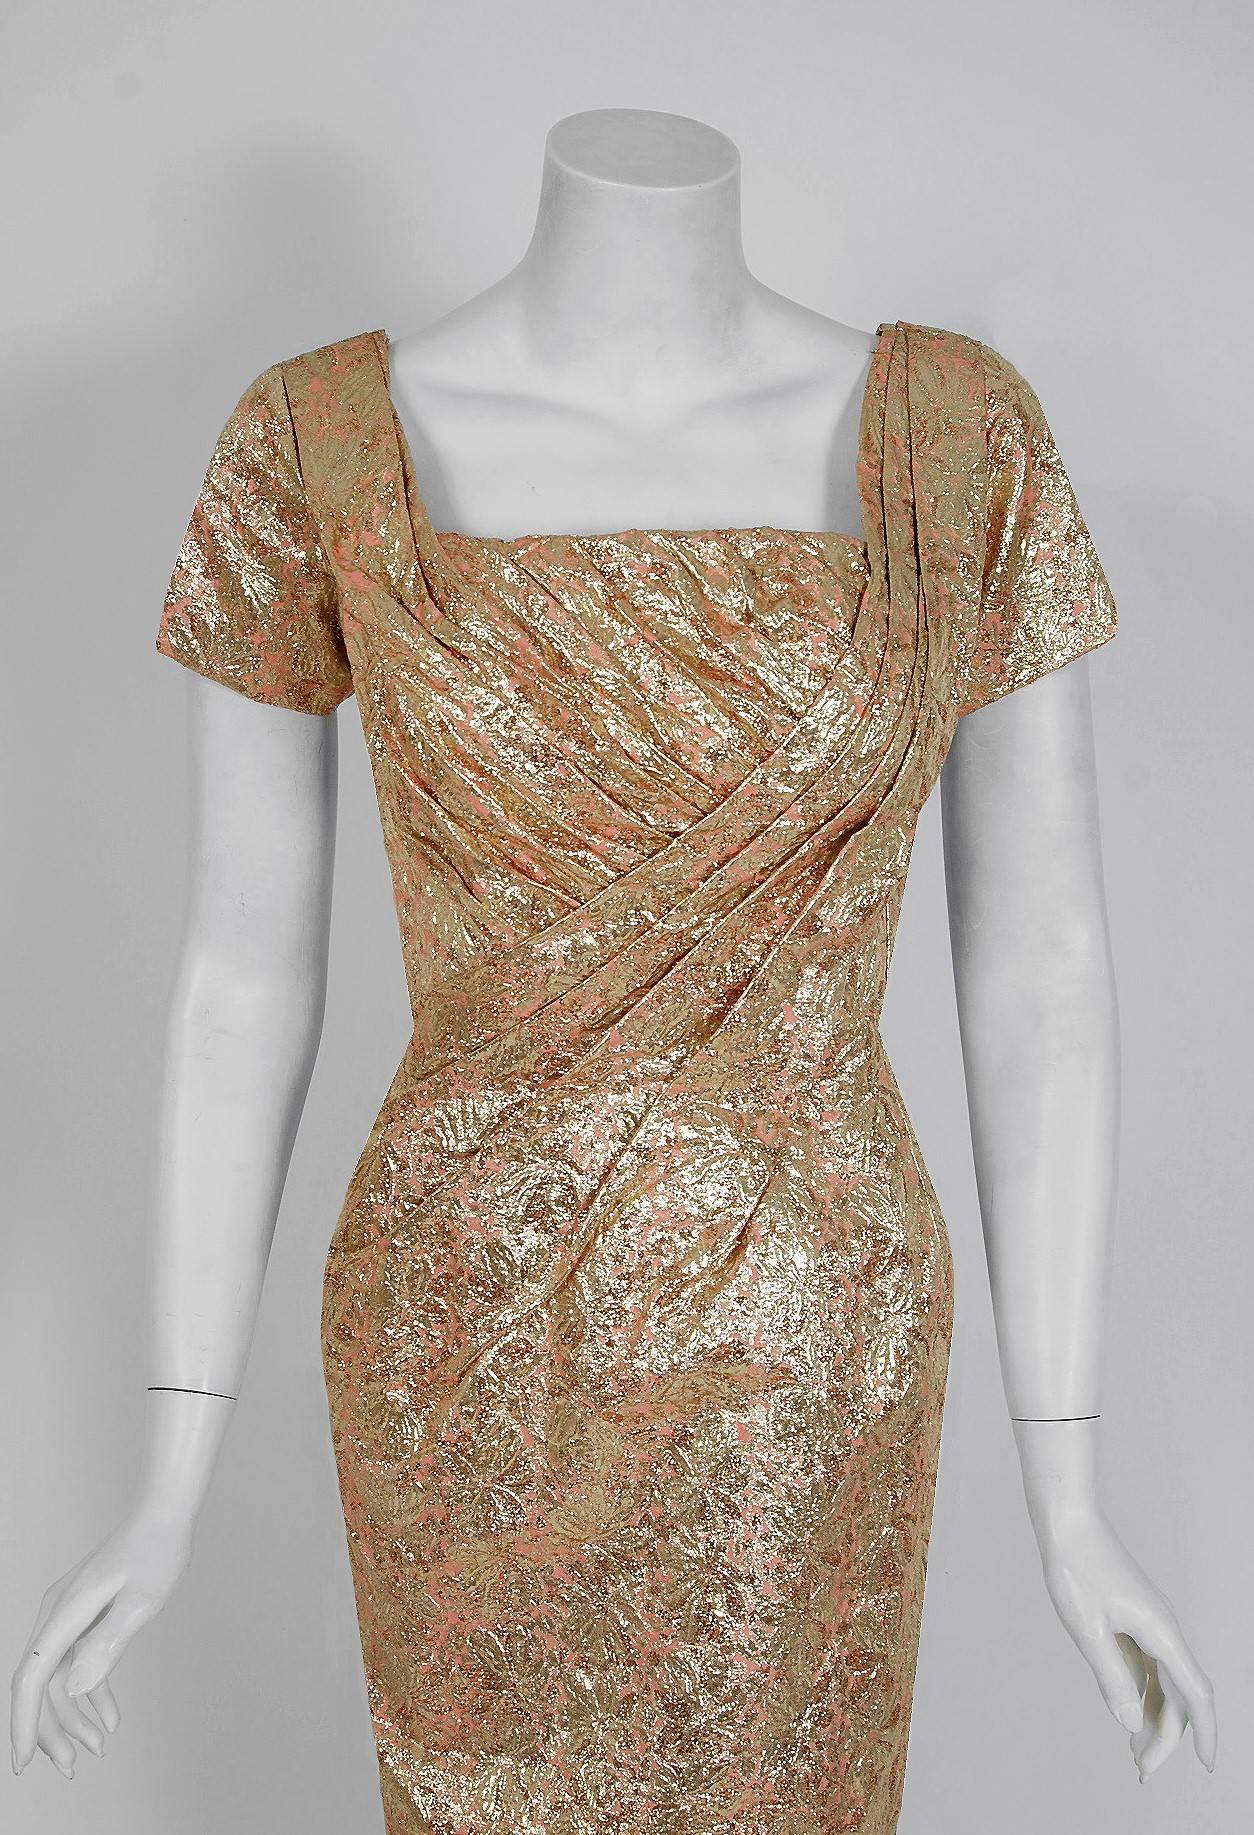 This is such a seductive and dramatic cocktail dress from the iconic Ceil Chapman designer label. Perfect for any upcoming party; you can't help but feel feminine in this beauty! The garment is fashioned from a stunning metallic gold floral